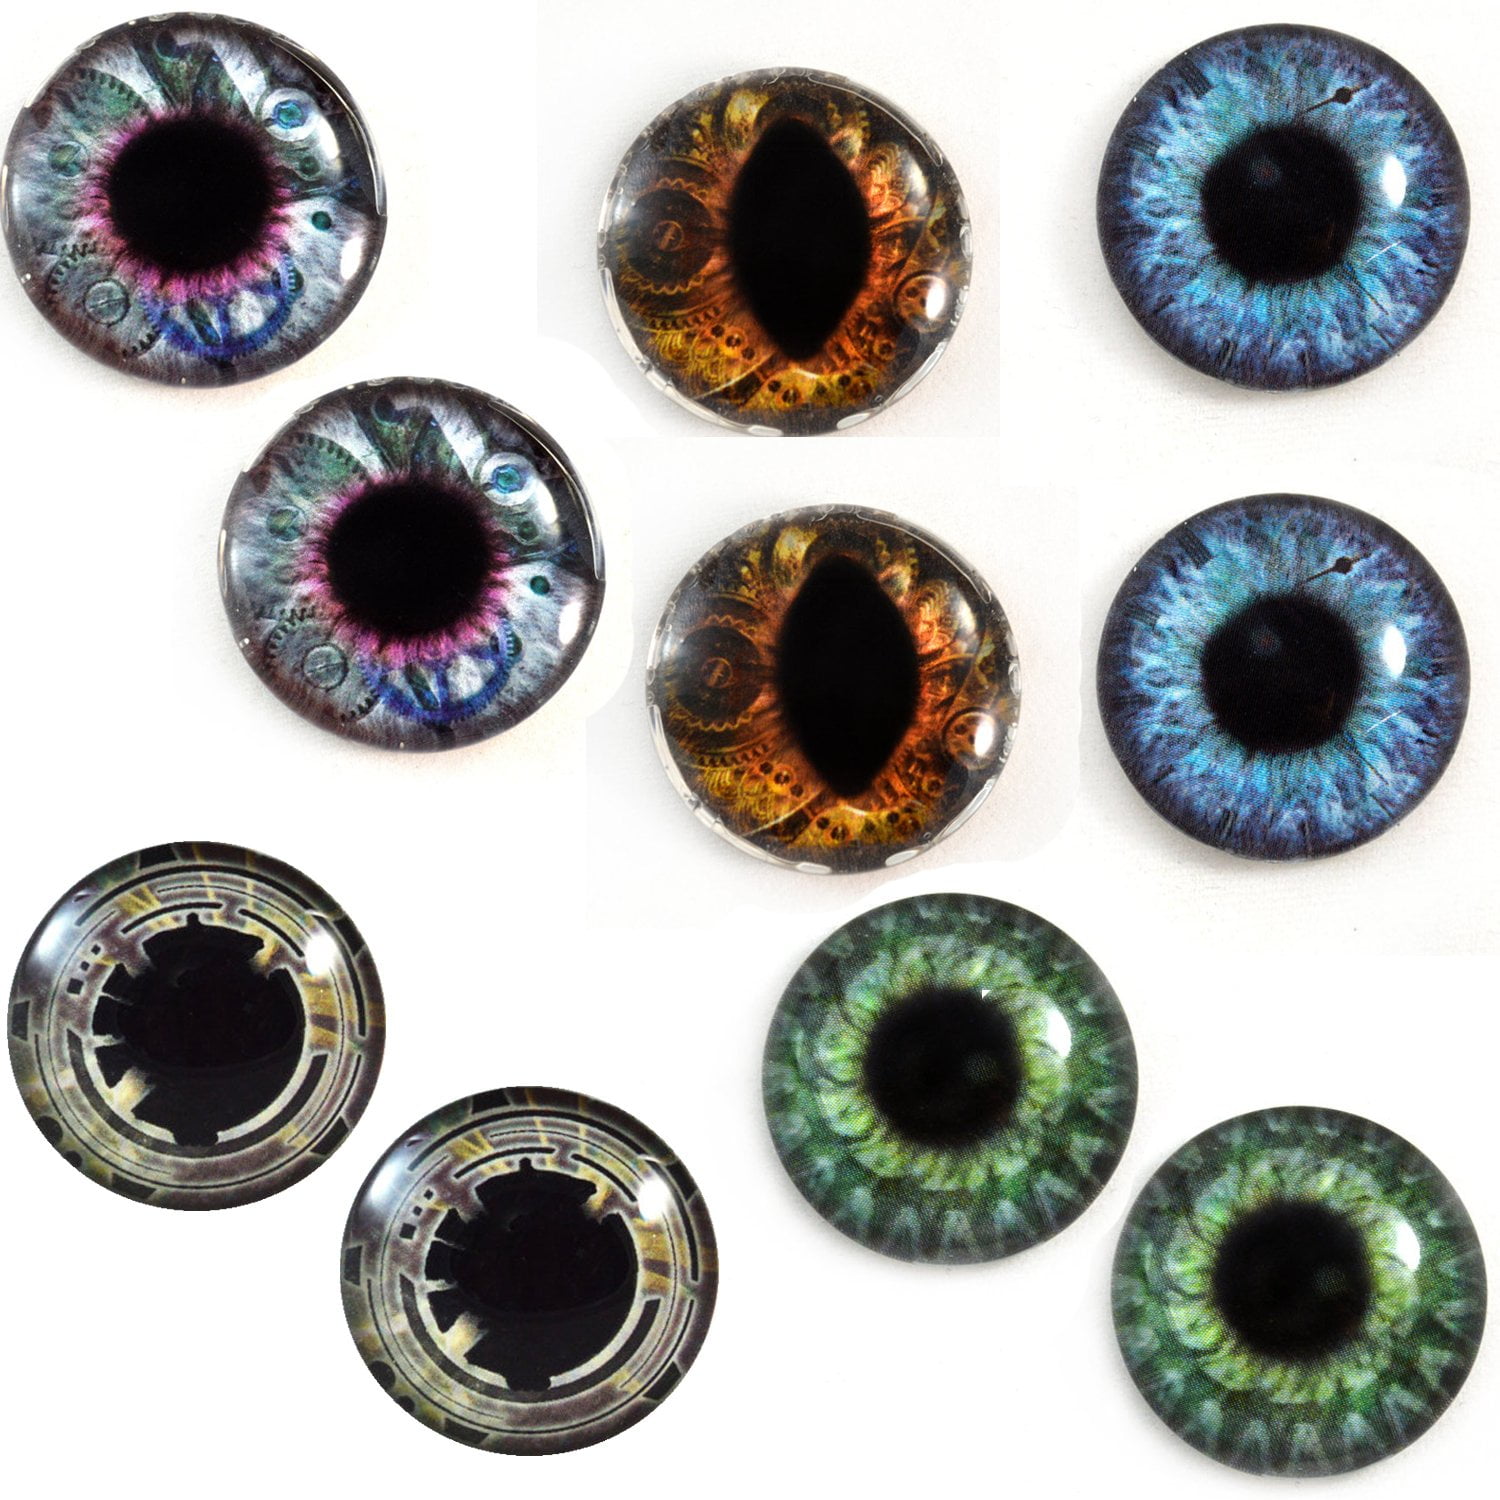 Pair of 20mm Pink and Blue Steampunk Glass Eyes Cabochons Set 